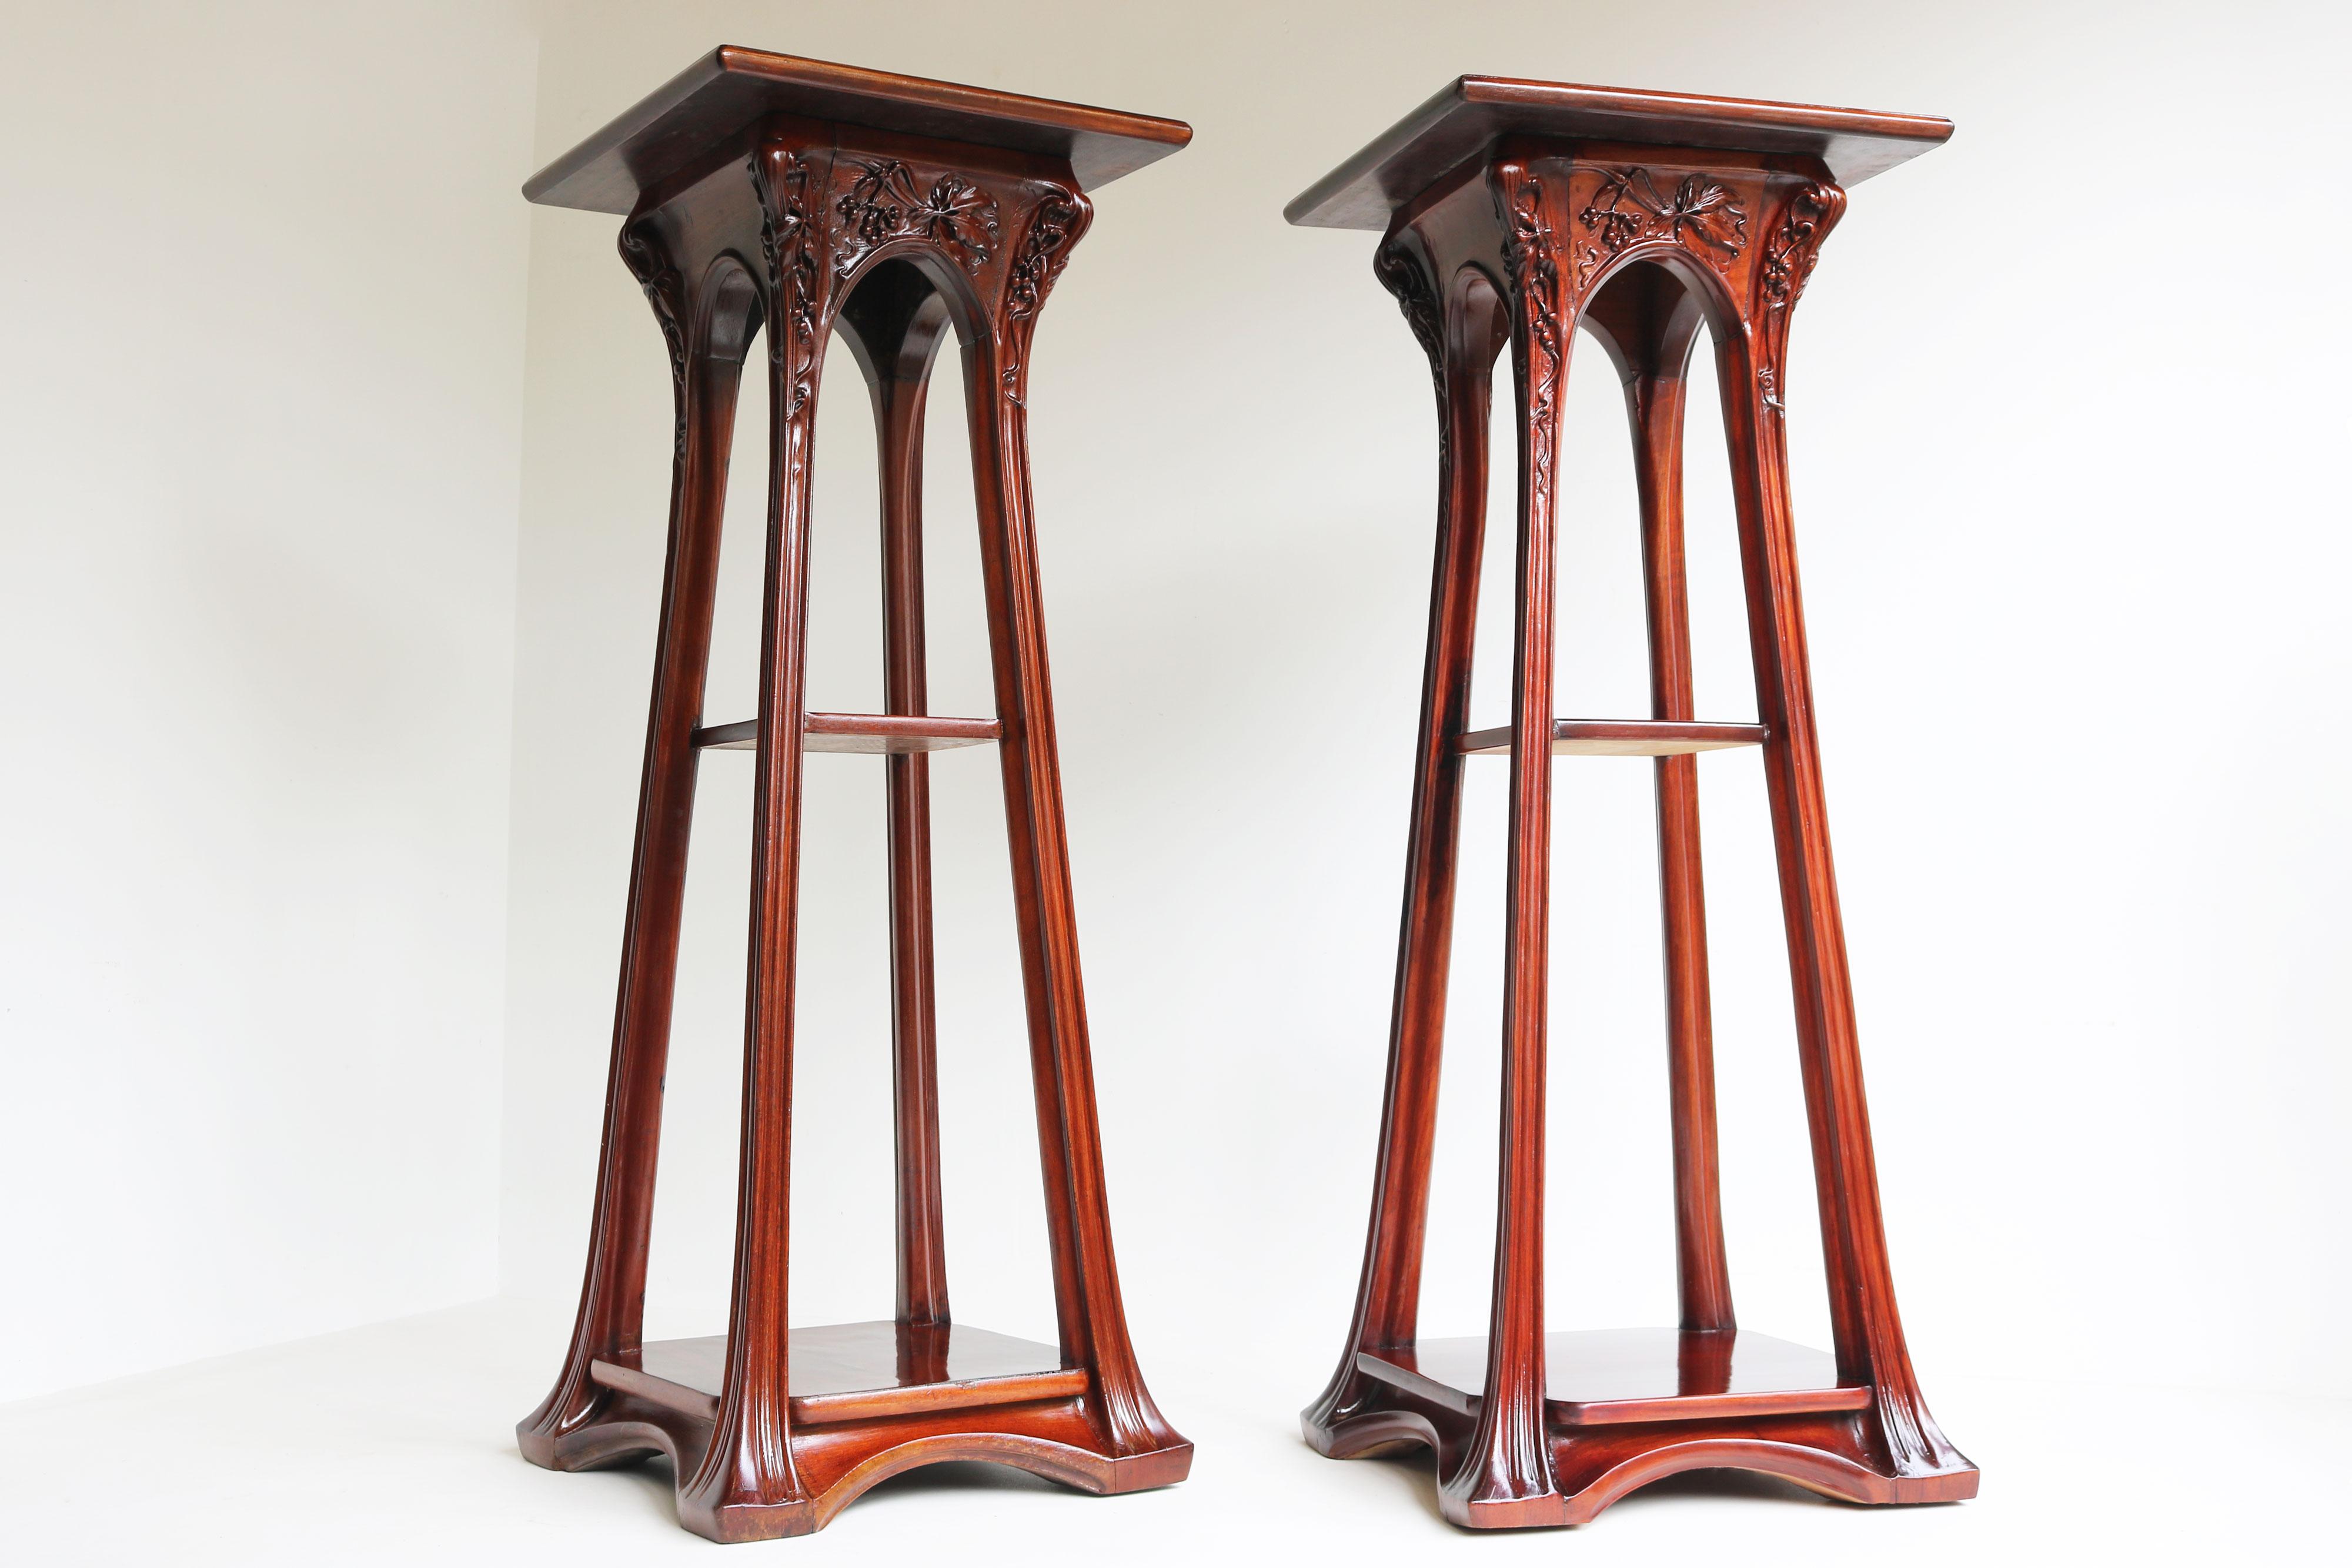 Exquisite pair of stylized Art Nouveau plant stands / pedestals by Louis Majorelle designed in 1907 with carved ''Vigne Vierge'' decorations.
Each pedestal has 3 tiers and the top tiers rotate 360 degrees. Exquisite crafted and fully hand carved